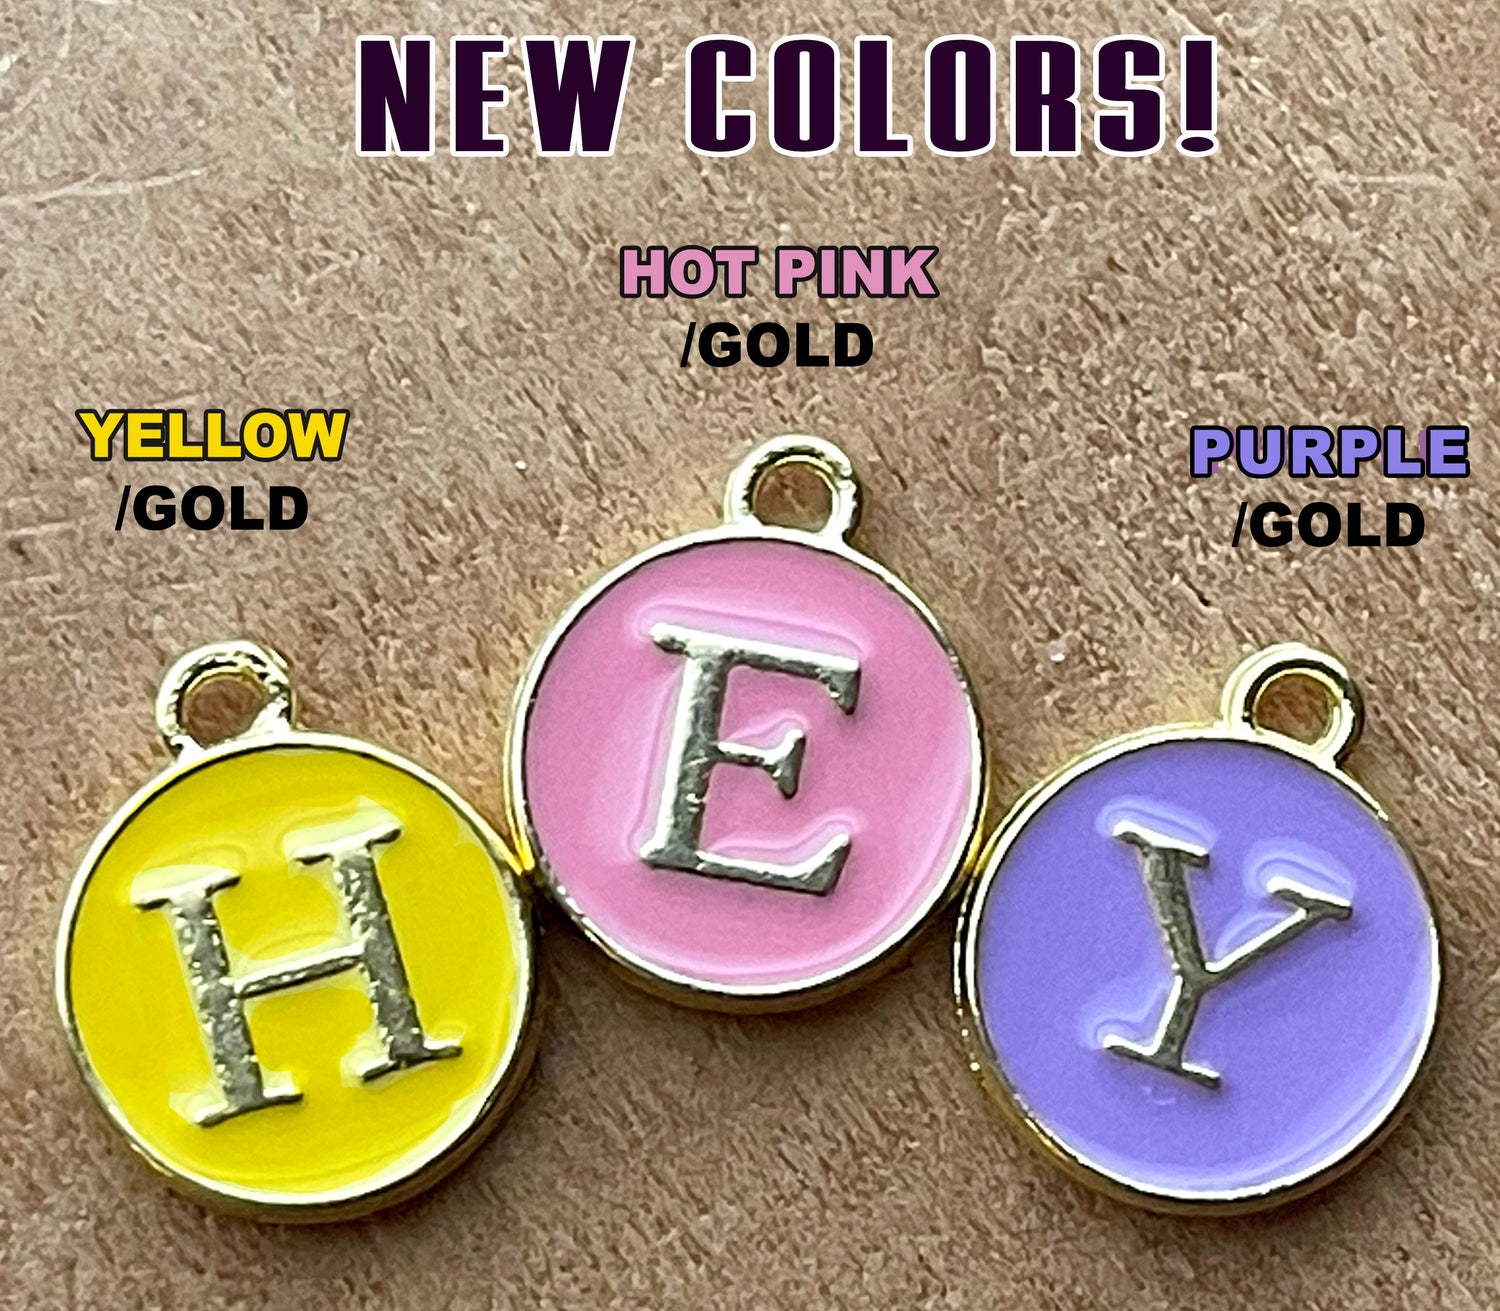 Letter charms–choose black, white, blue, pink, red, yellow, purple or green. Spell name, initials (double sided enamel alphabet jewelry)